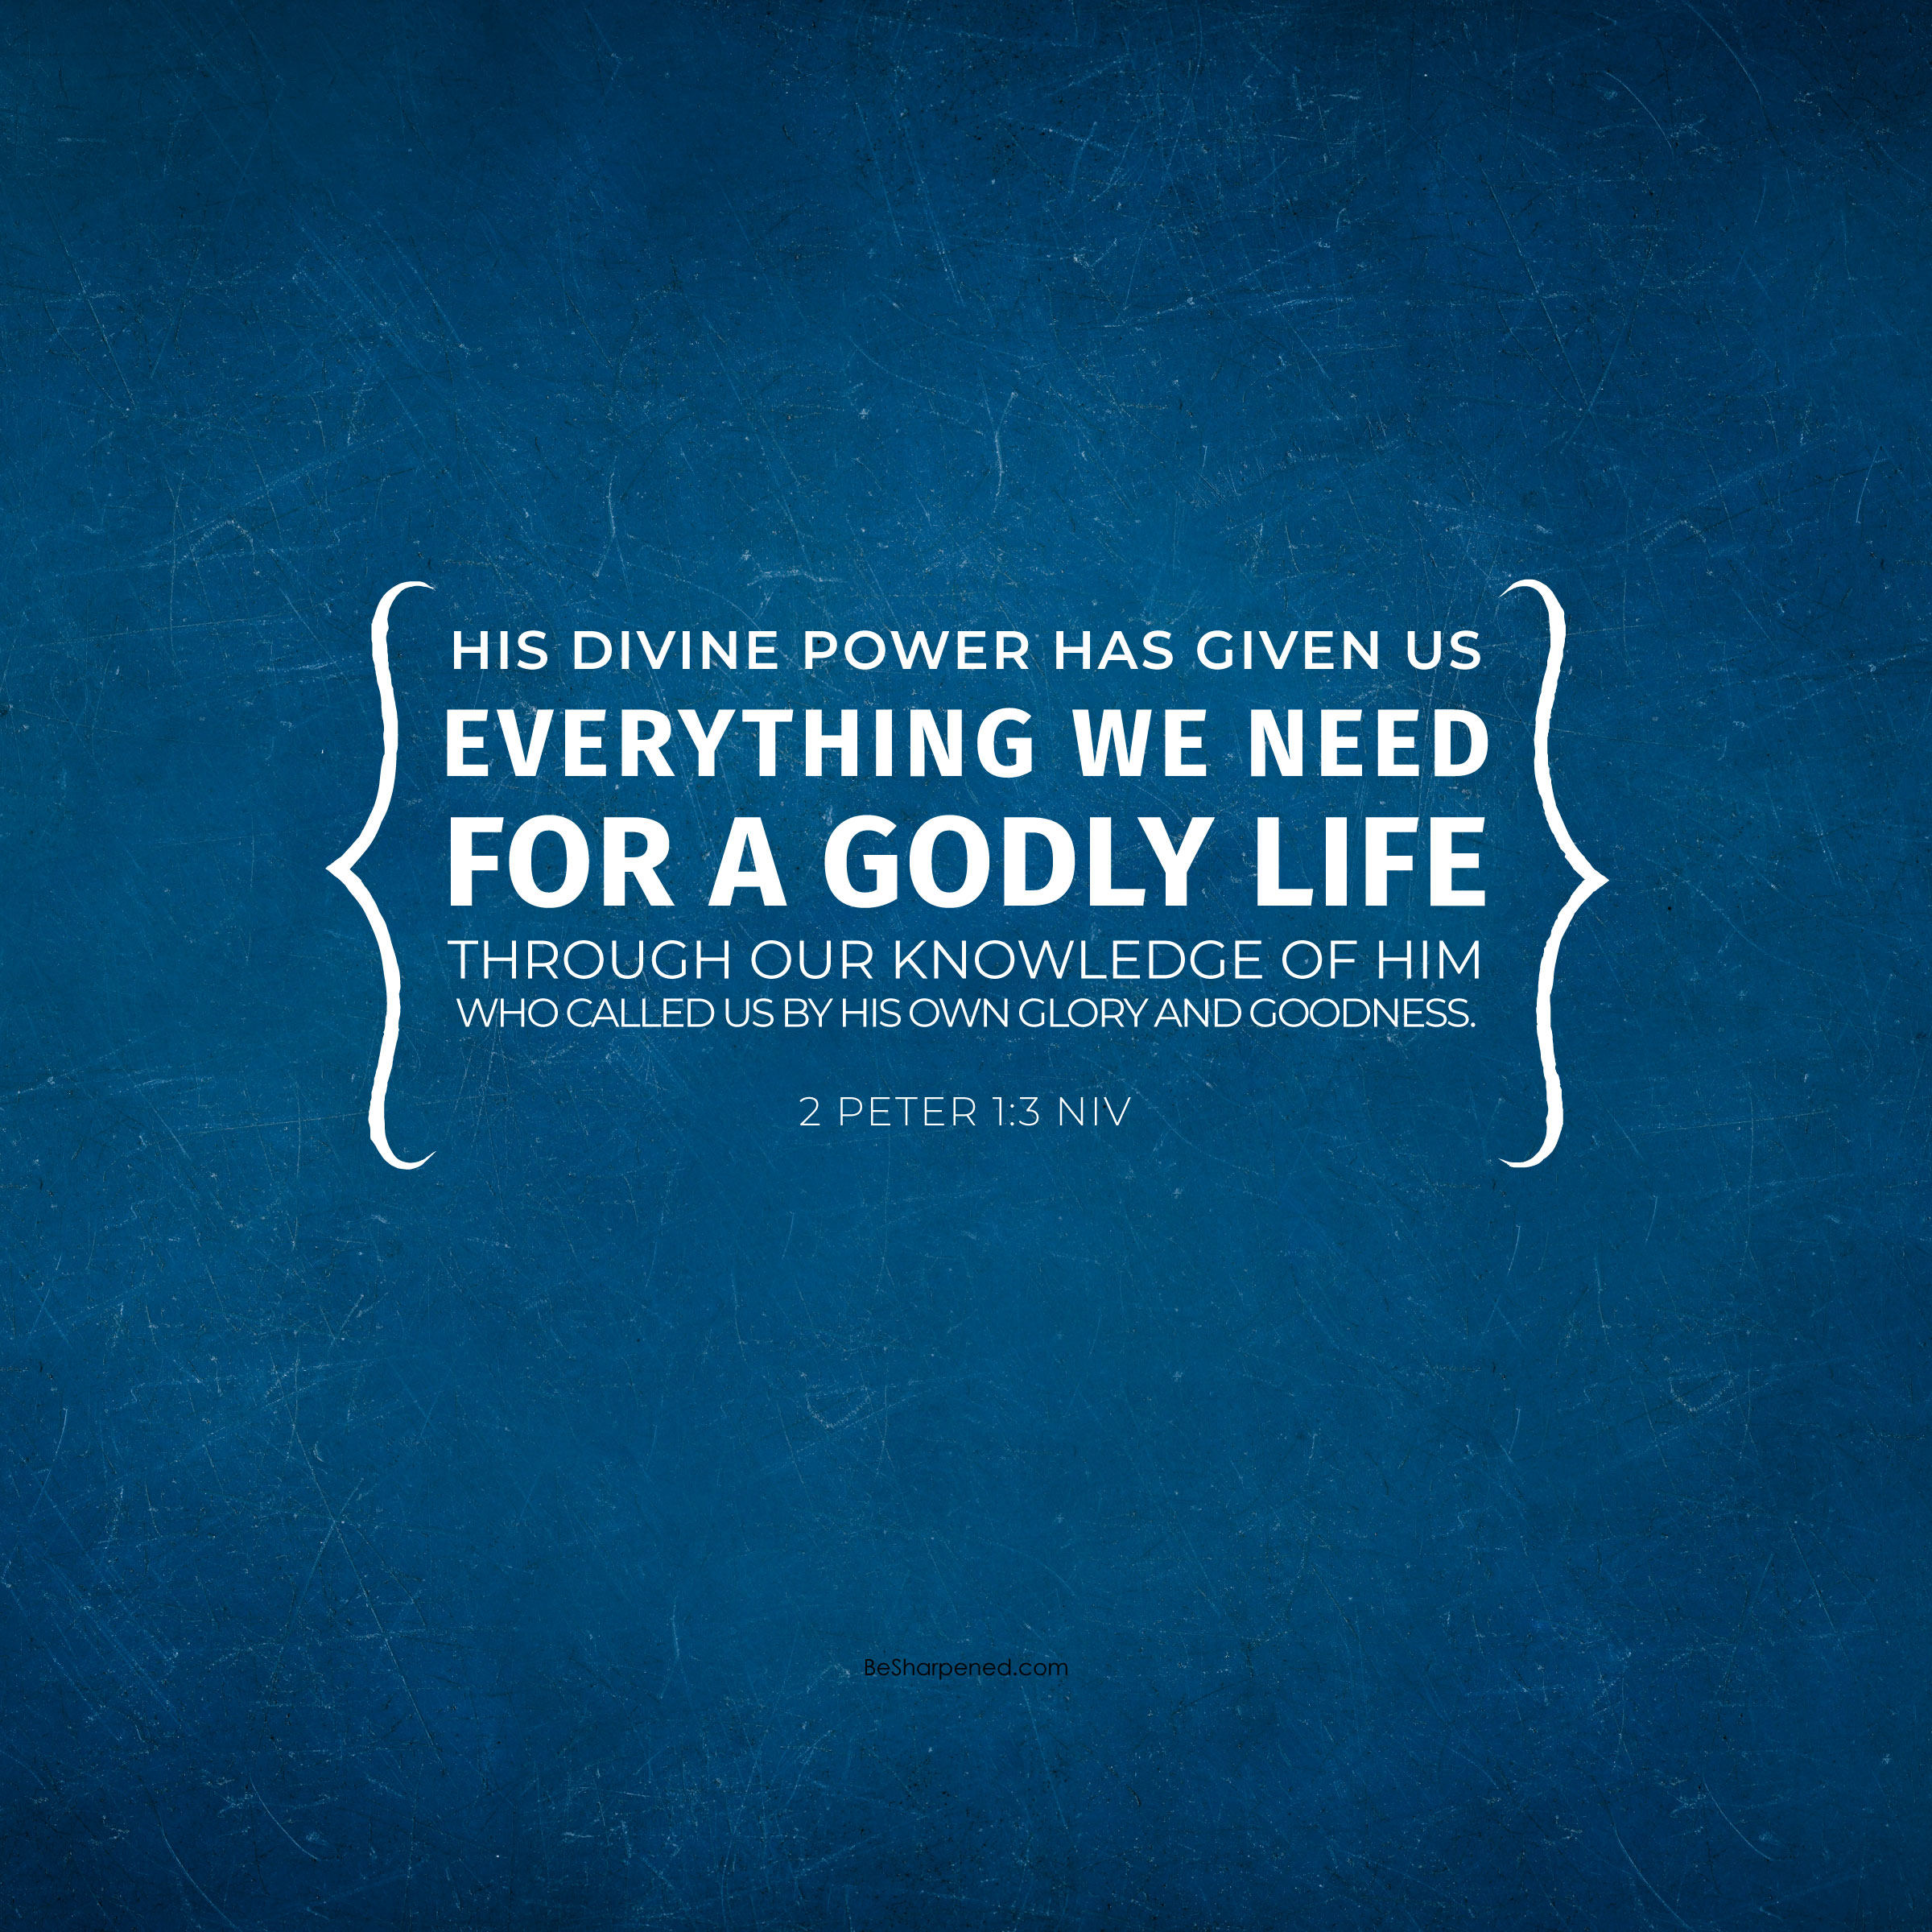 2 Peter 1:3 - godly life